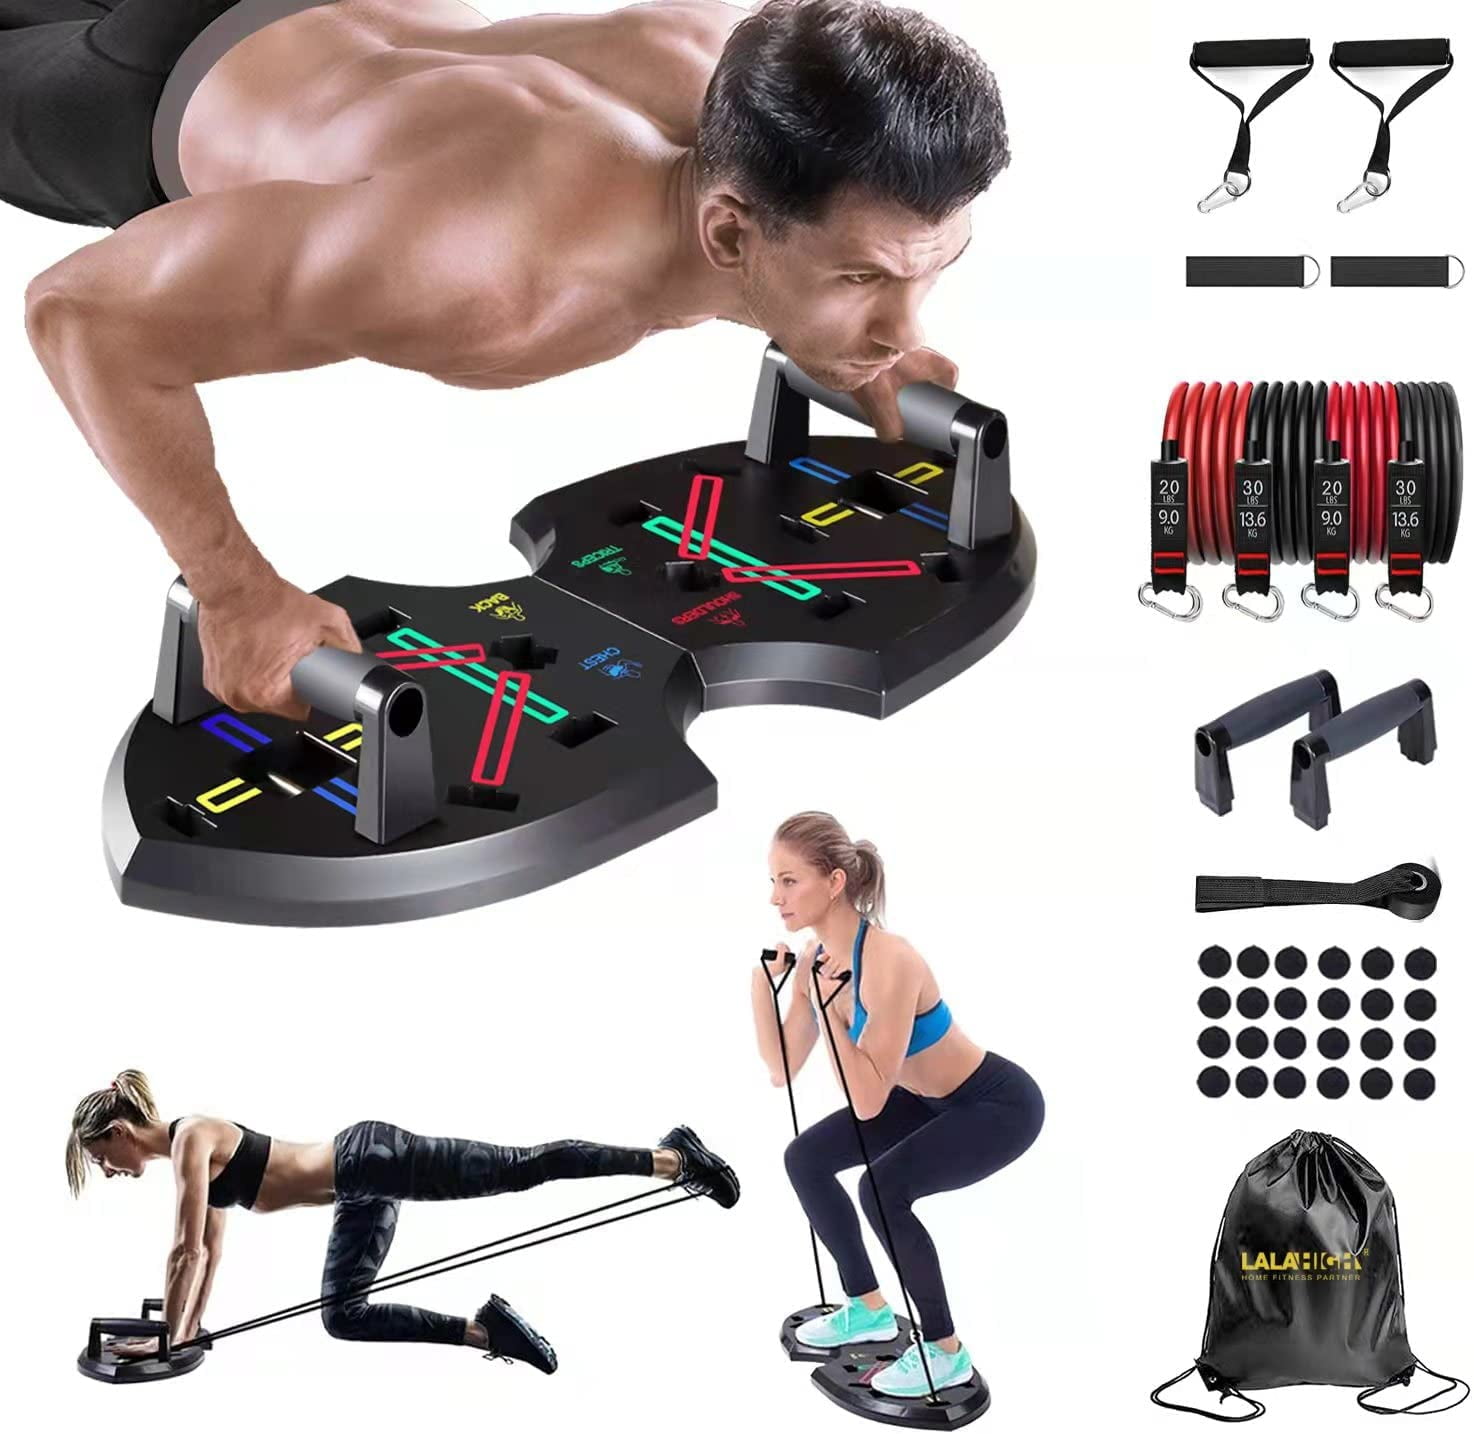 QyWyII Push Up Board Unisex Foldable Muscle Exercise Home Workout Equipment Color-coded Multifunctional Training Stands for Indoor Home Gym 